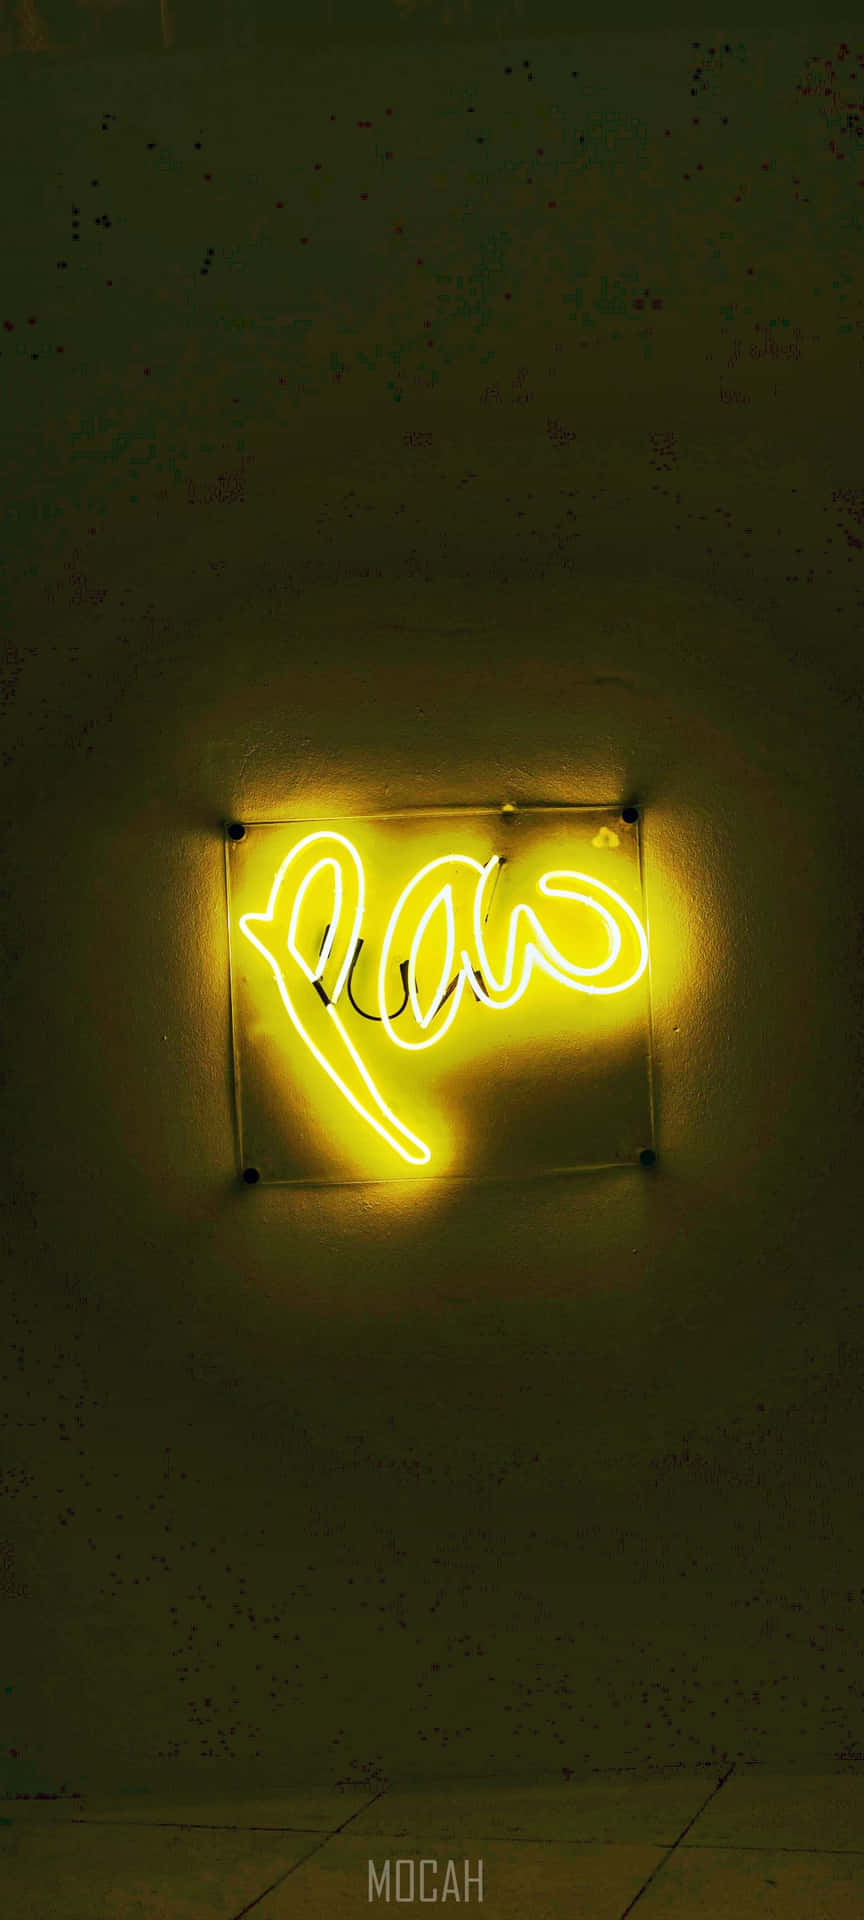 A Bright Yellow Neon Light Shines in the Night Wallpaper